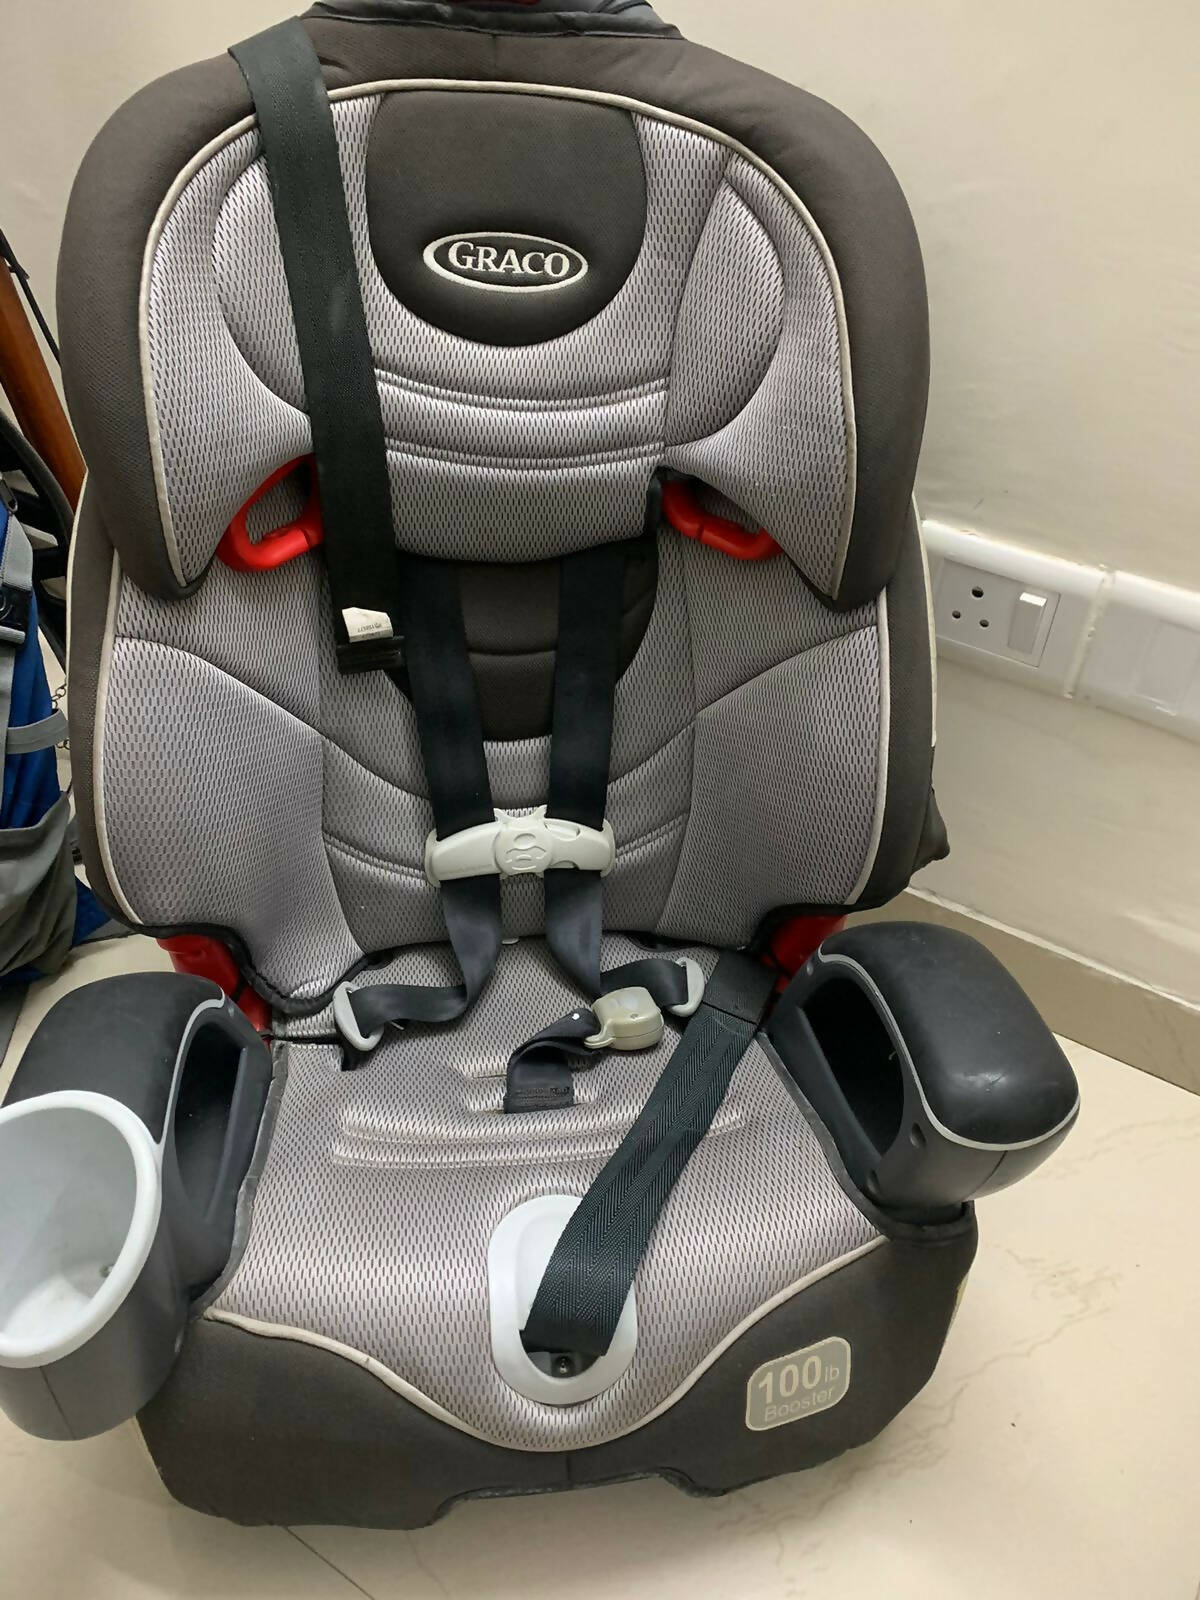 GRACO 4ever DLX 4 in 1 Convertible Car seat